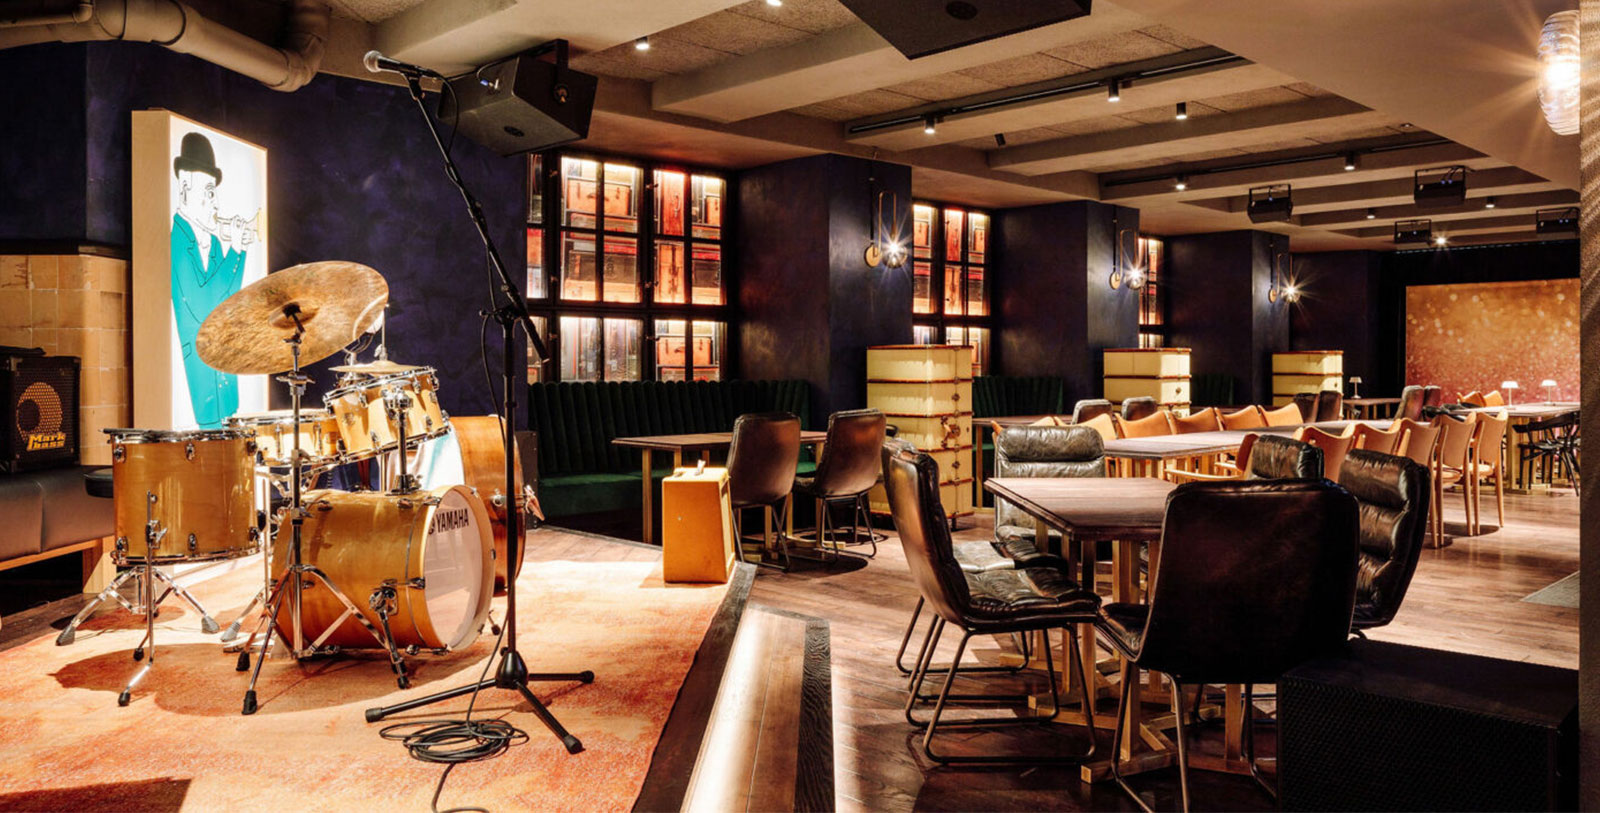 Experience a night of superb music at the hotel's Gustav Jazz Bar.